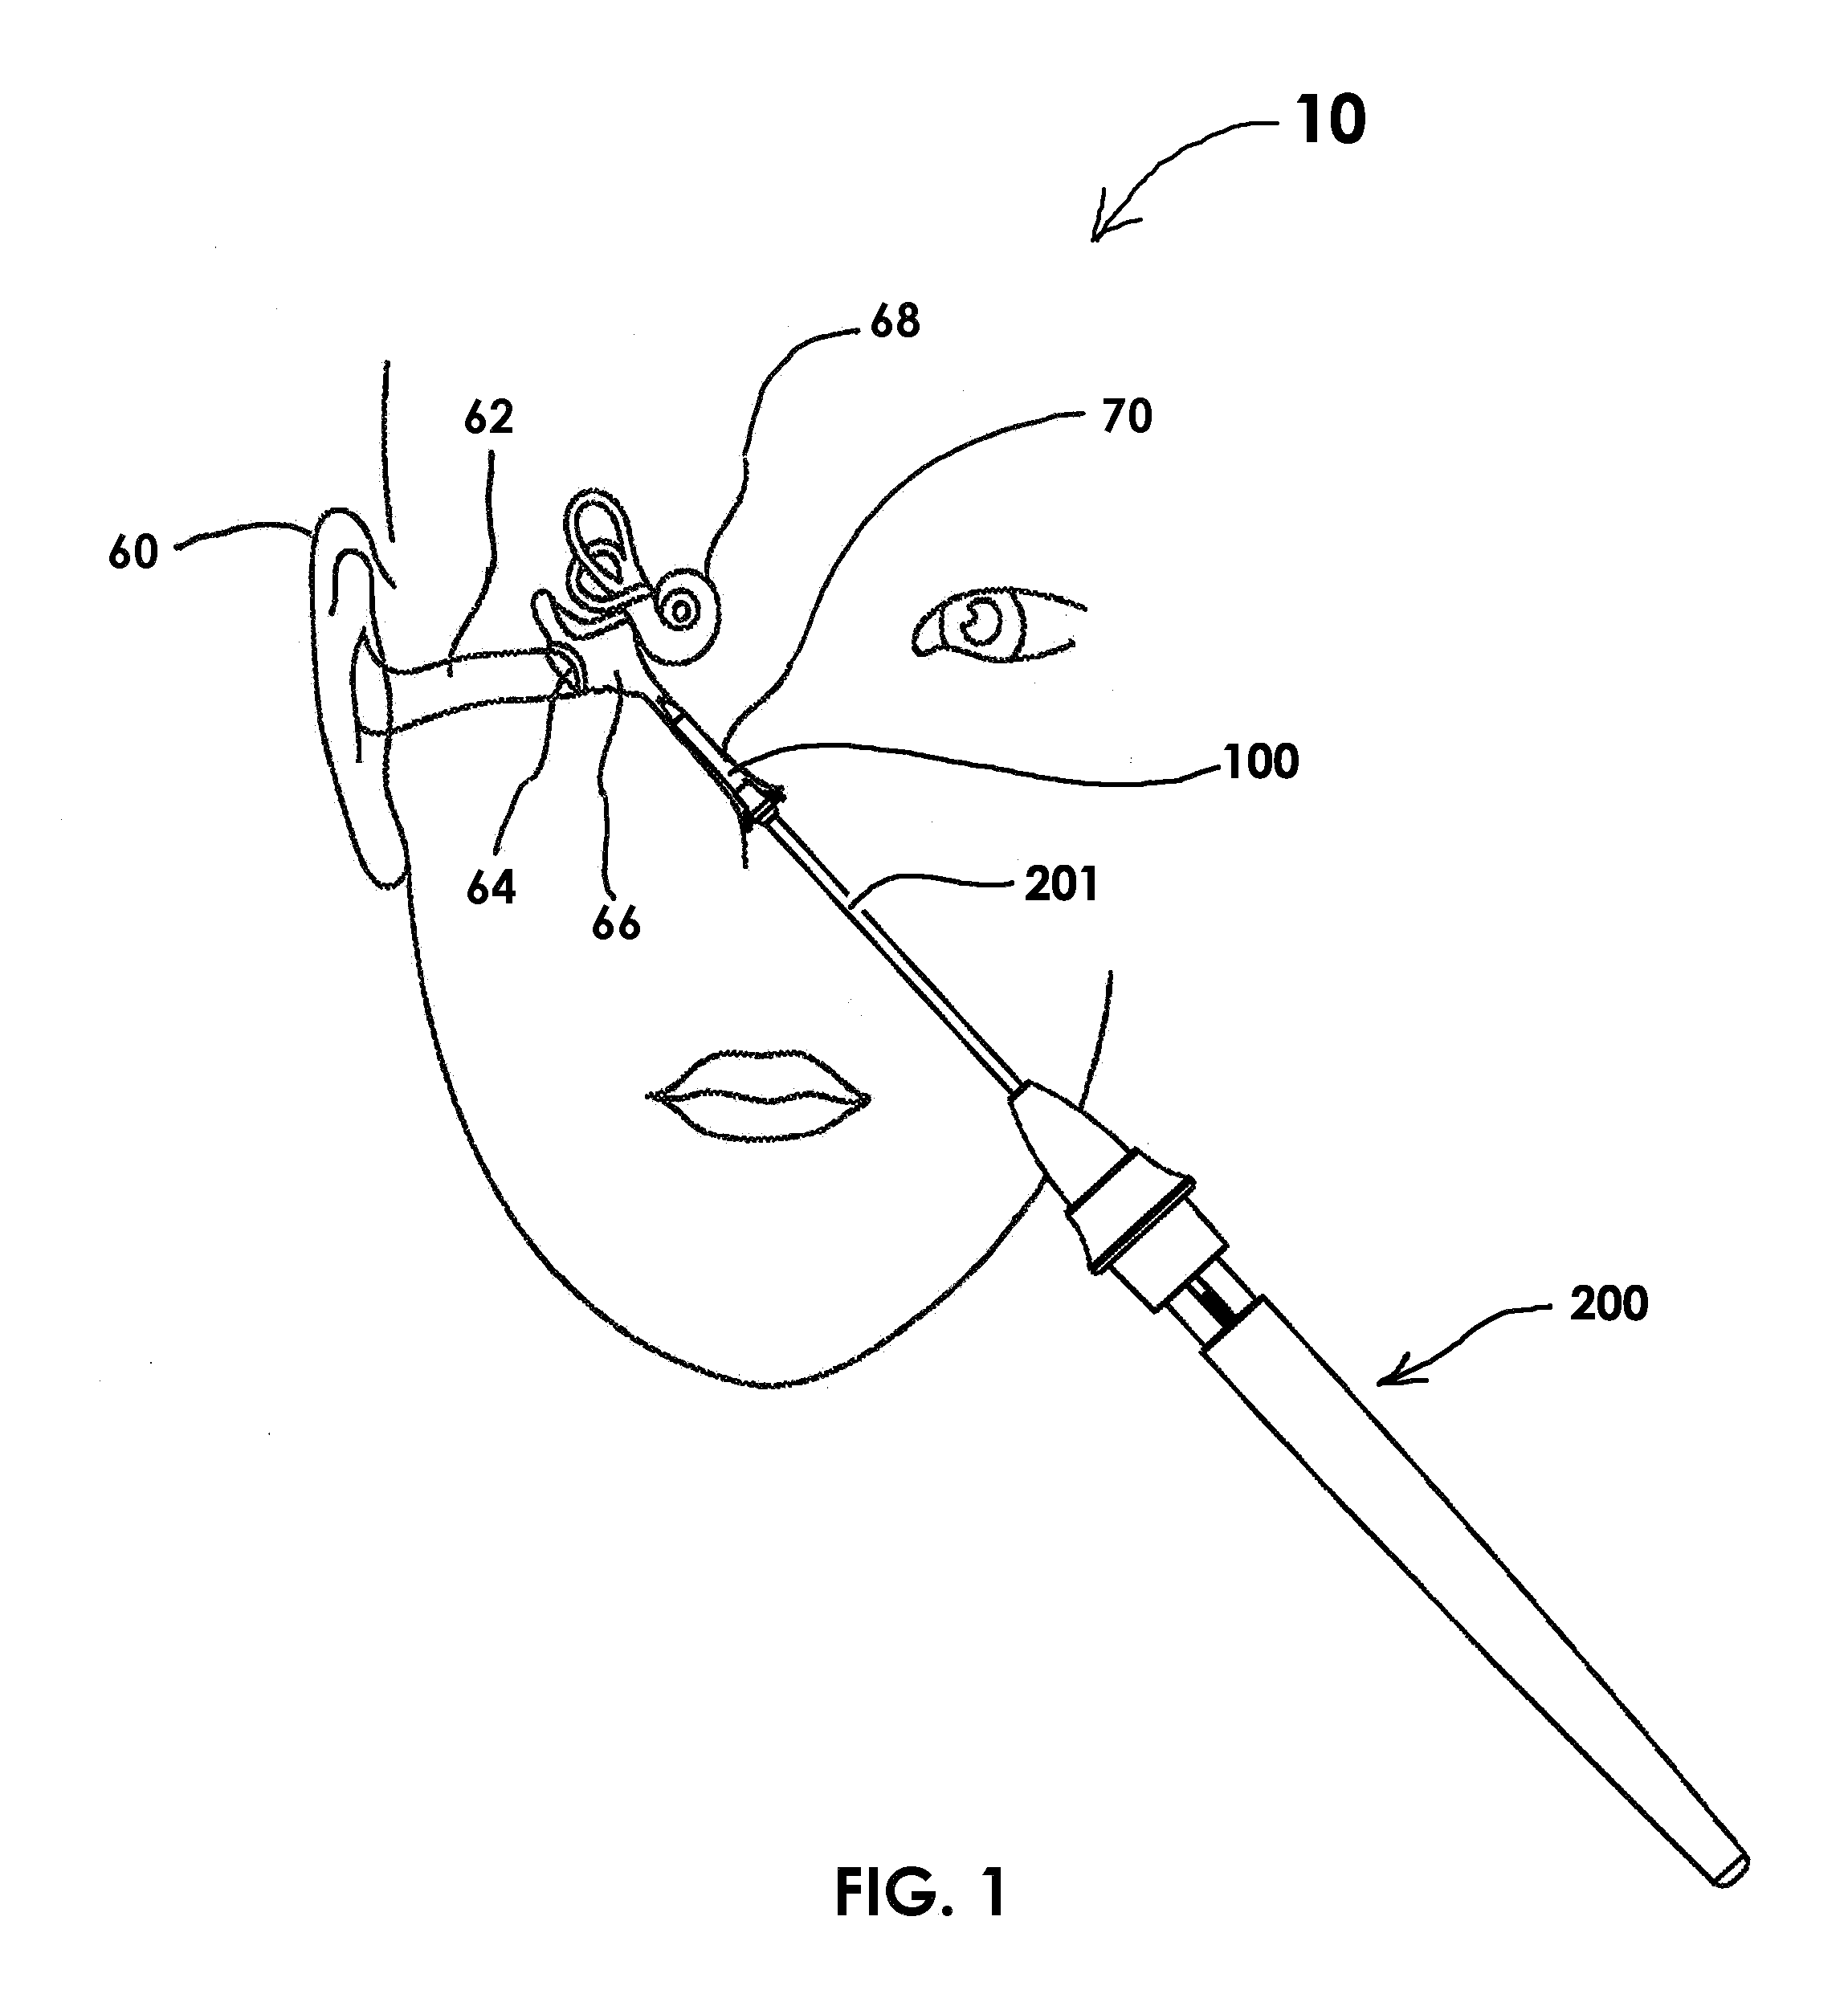 Devices and methods for Dilating a Eustachian Tube